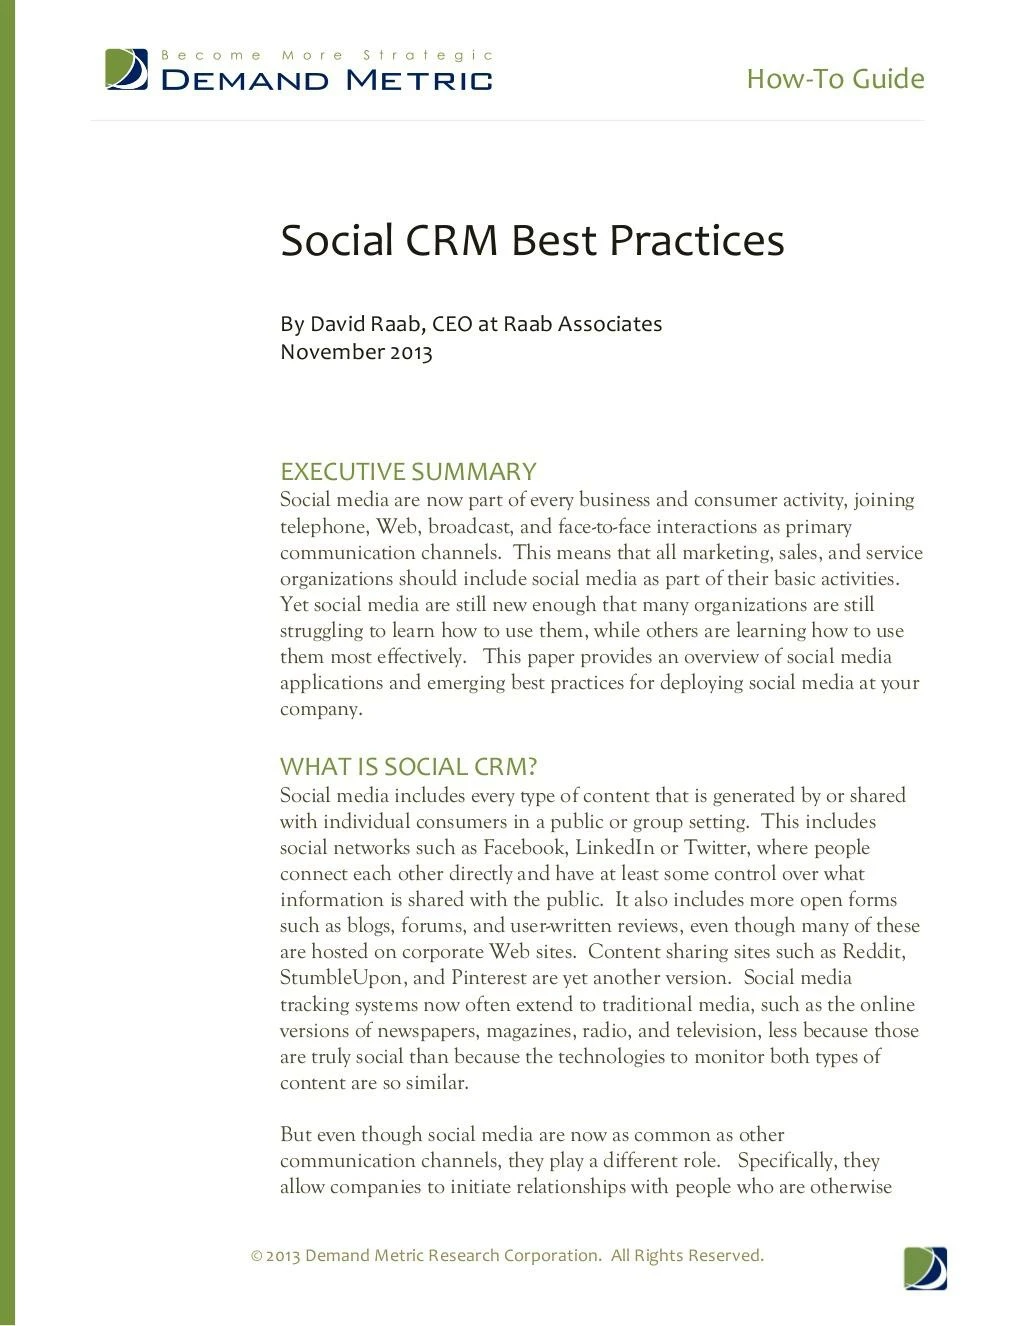 how to guide social crm best practices